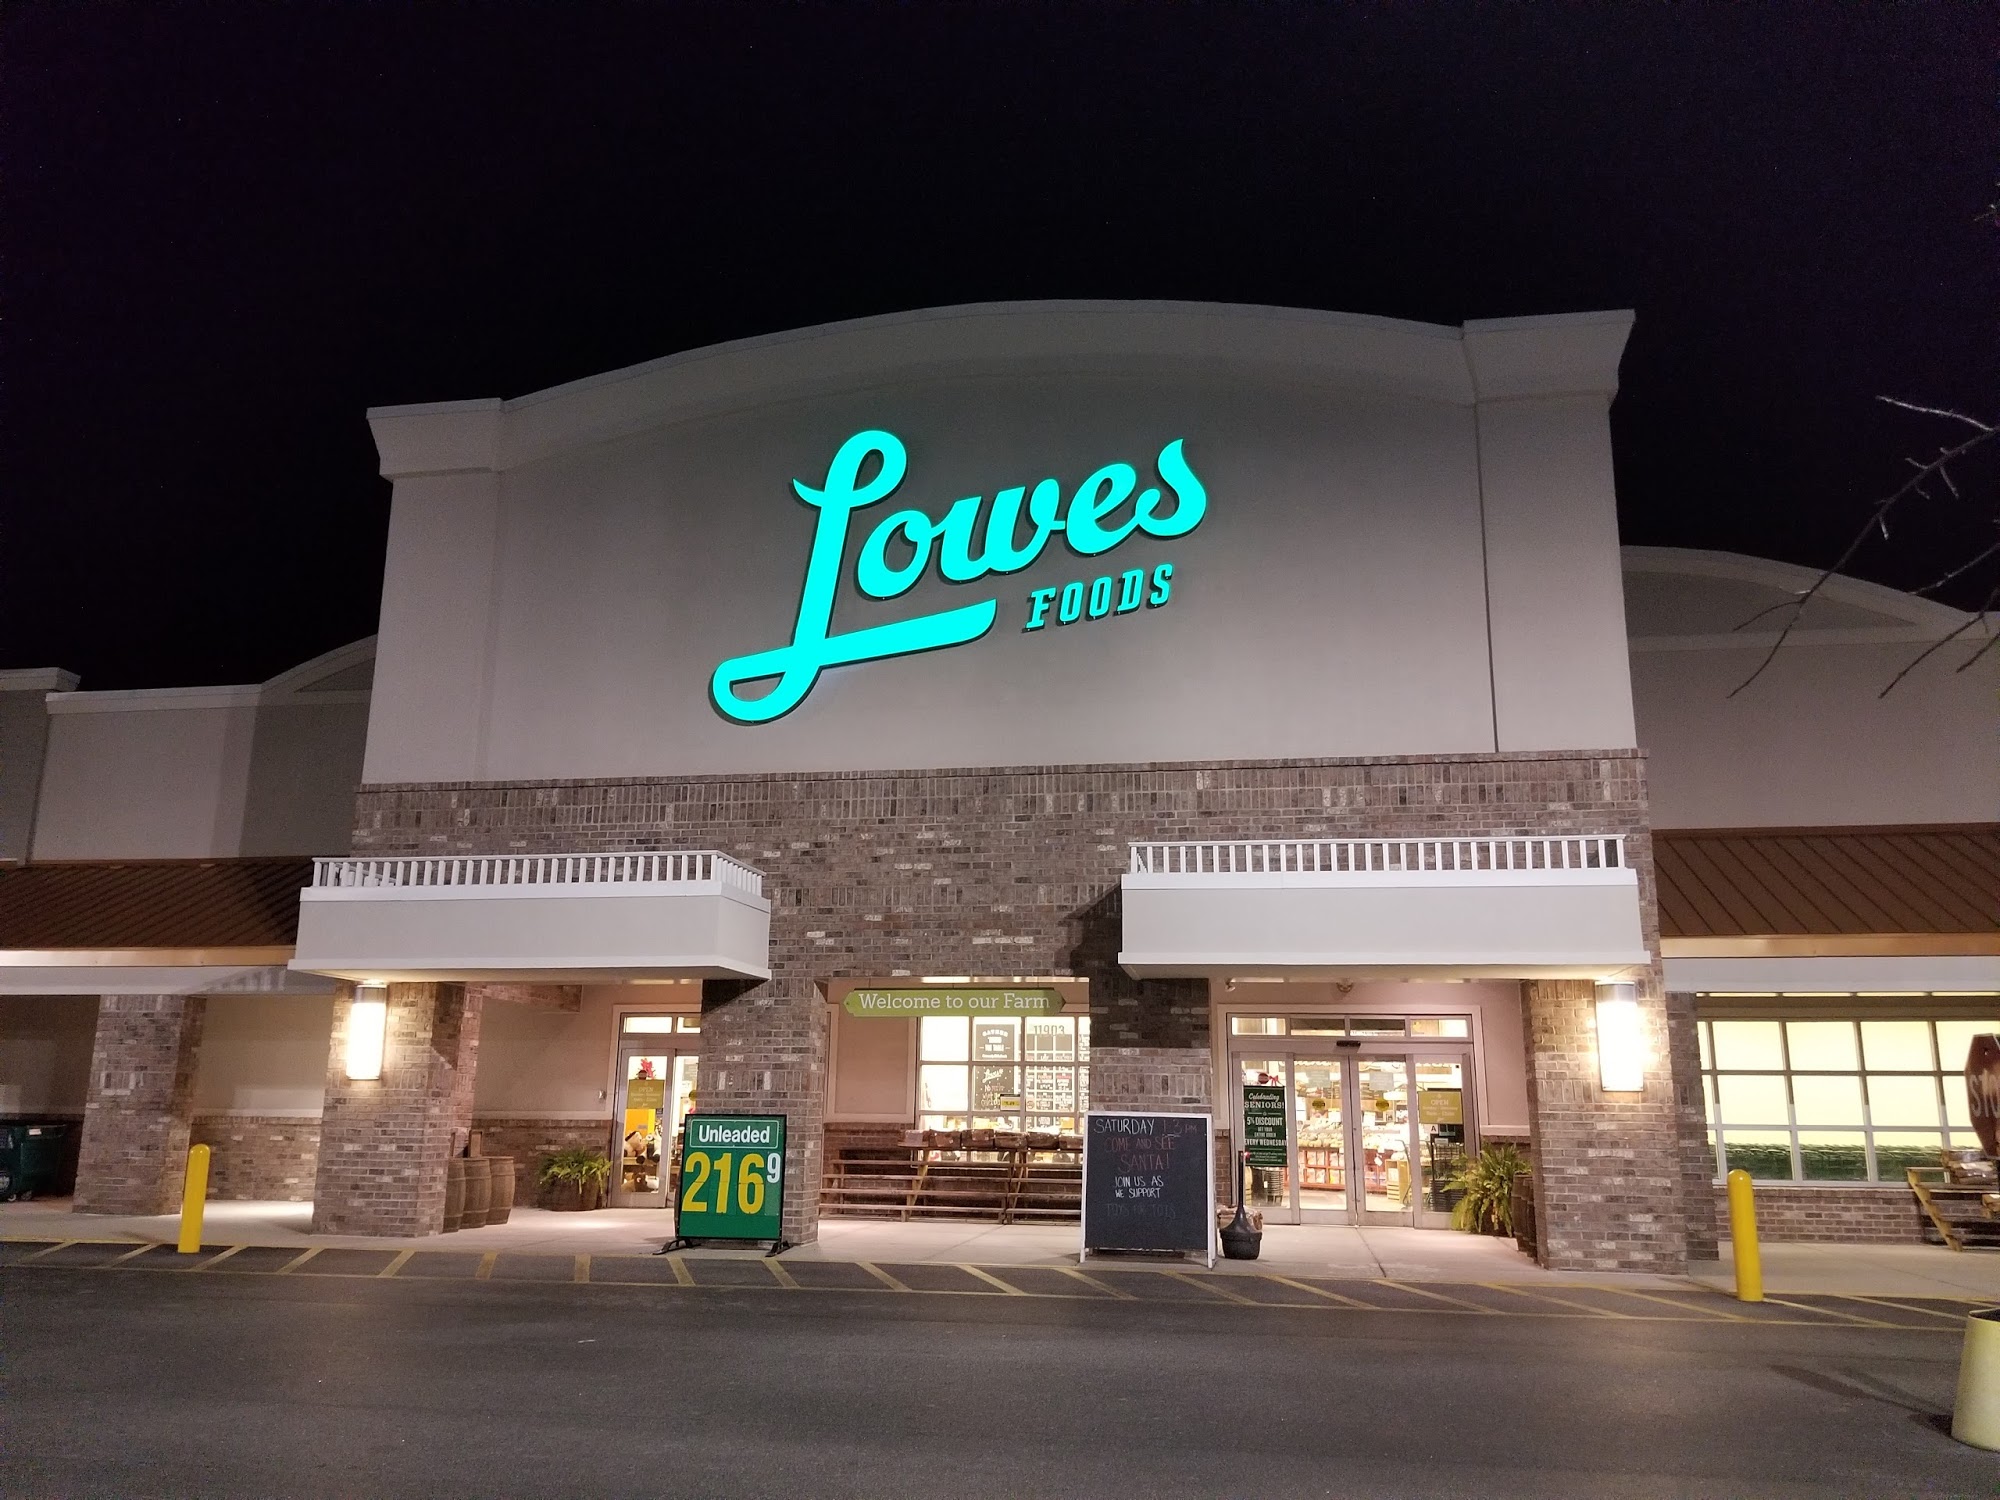 Lowes Foods of Murrells Inlet